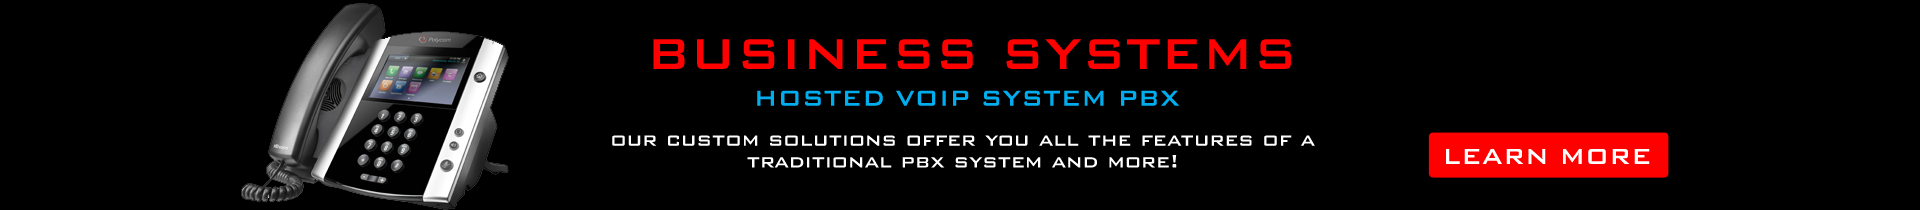 Business VoIP Systems